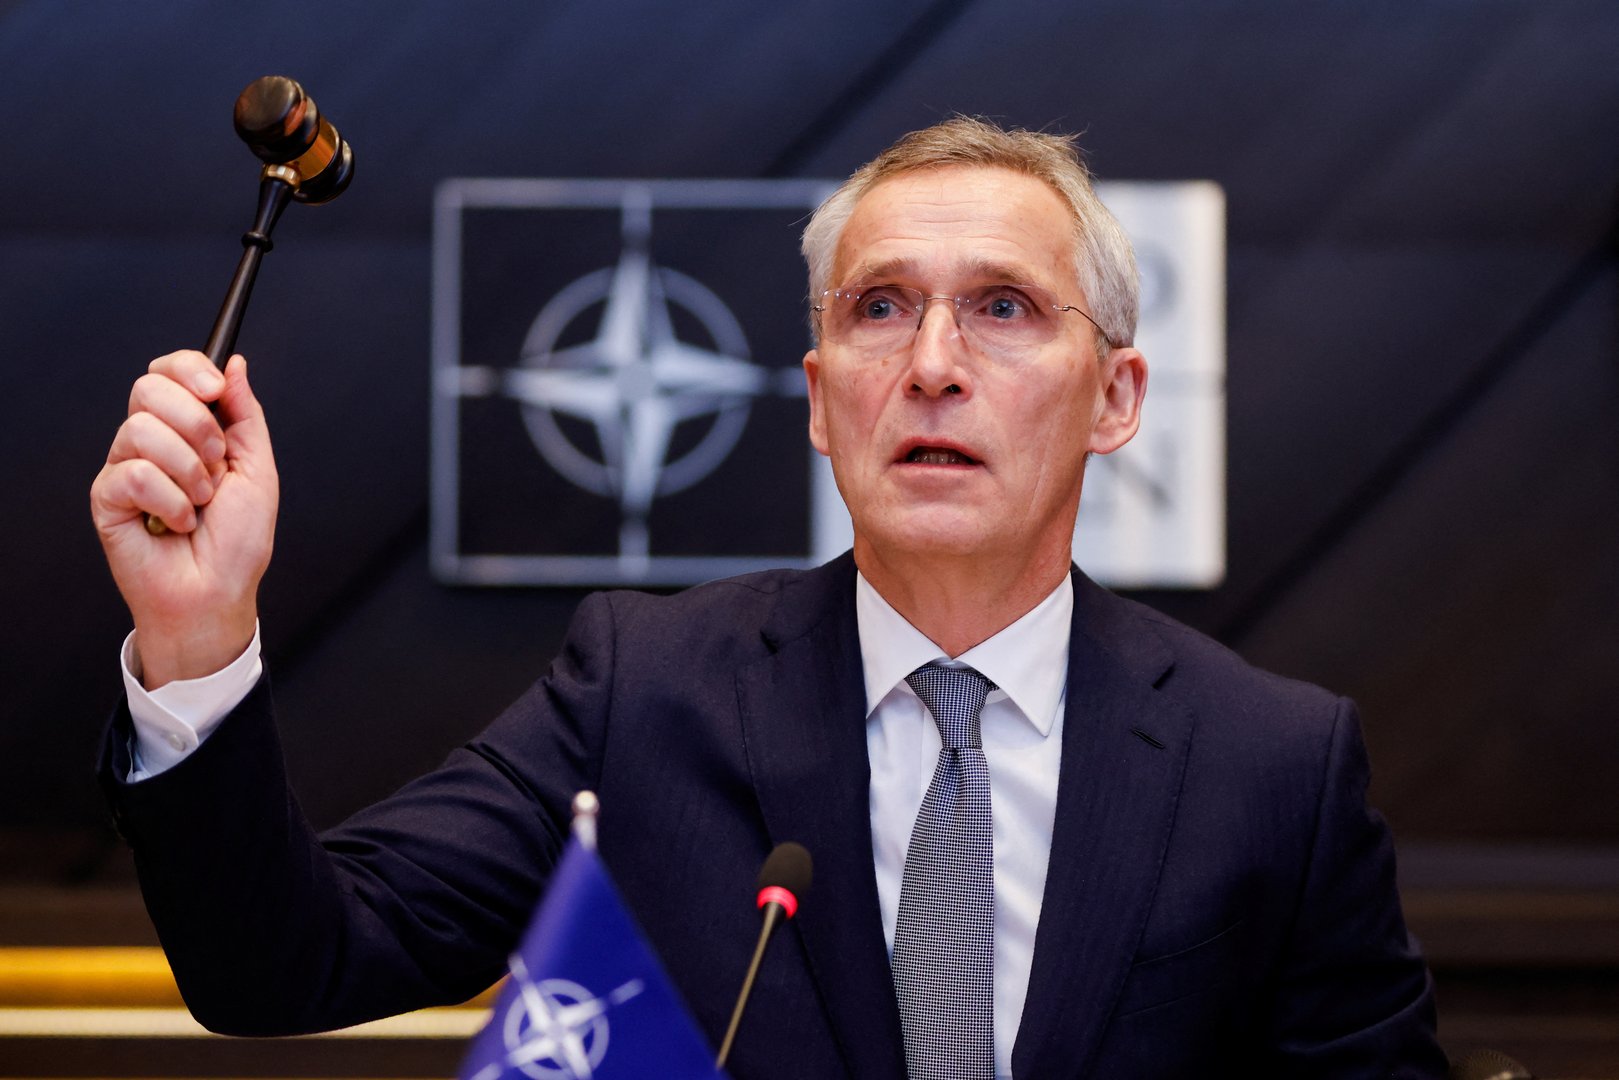 image NATO to take greater role in coordination of military aid for Kyiv, says Stoltenberg